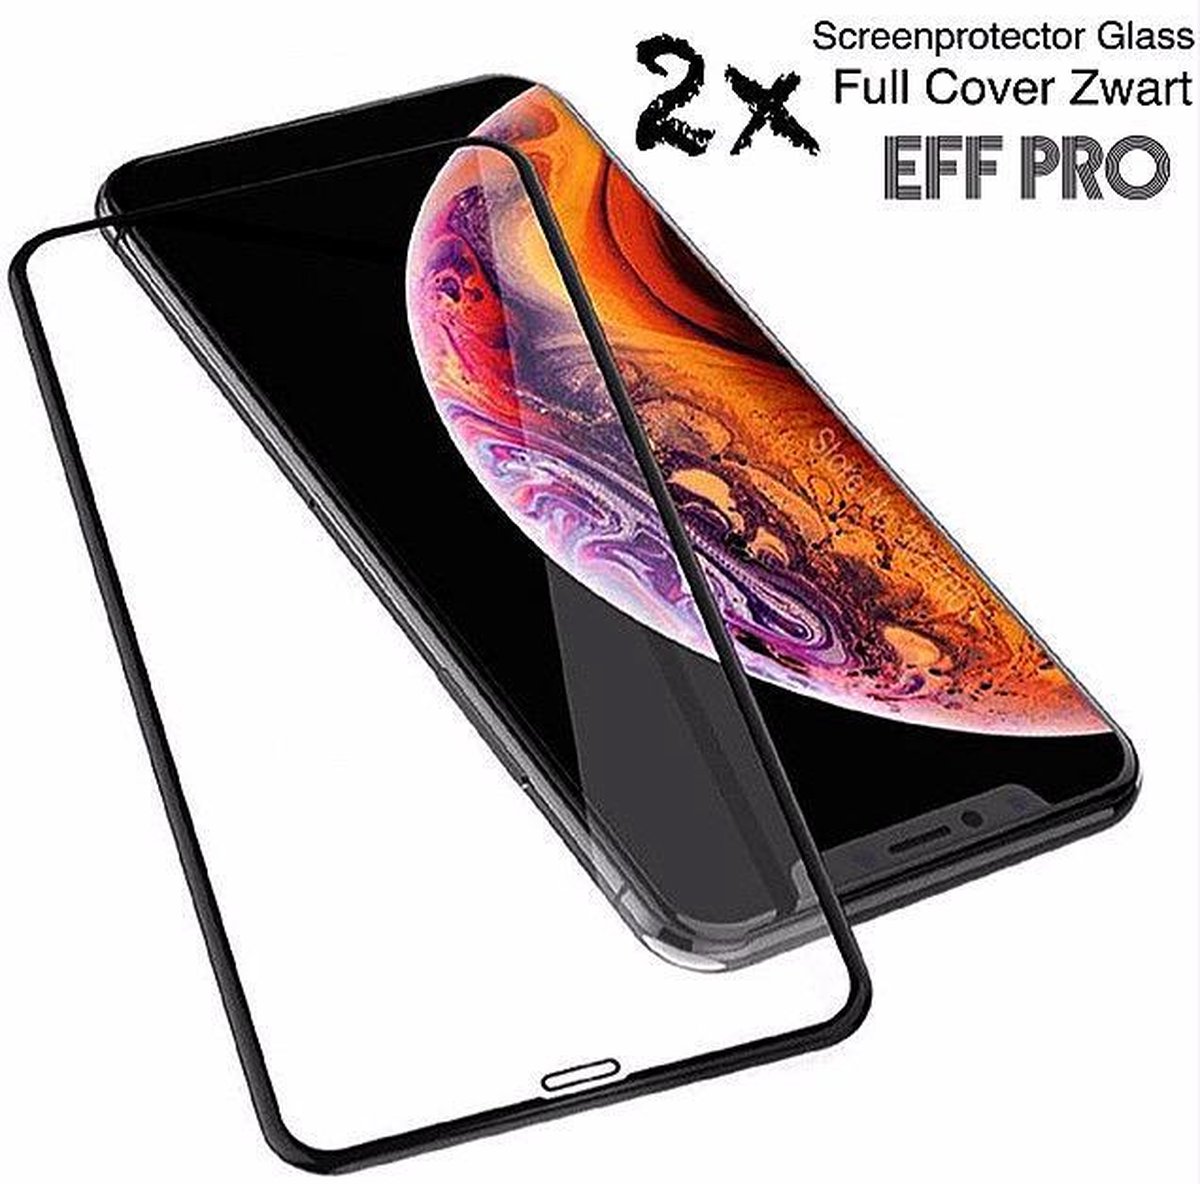 iPhone XR Screenprotector Glas Full Cover Zwart / iPhone 11 Screenprotector Glas Full Cover Zwar –Tempered Glass 2x (Voordelig) - Eff Pro